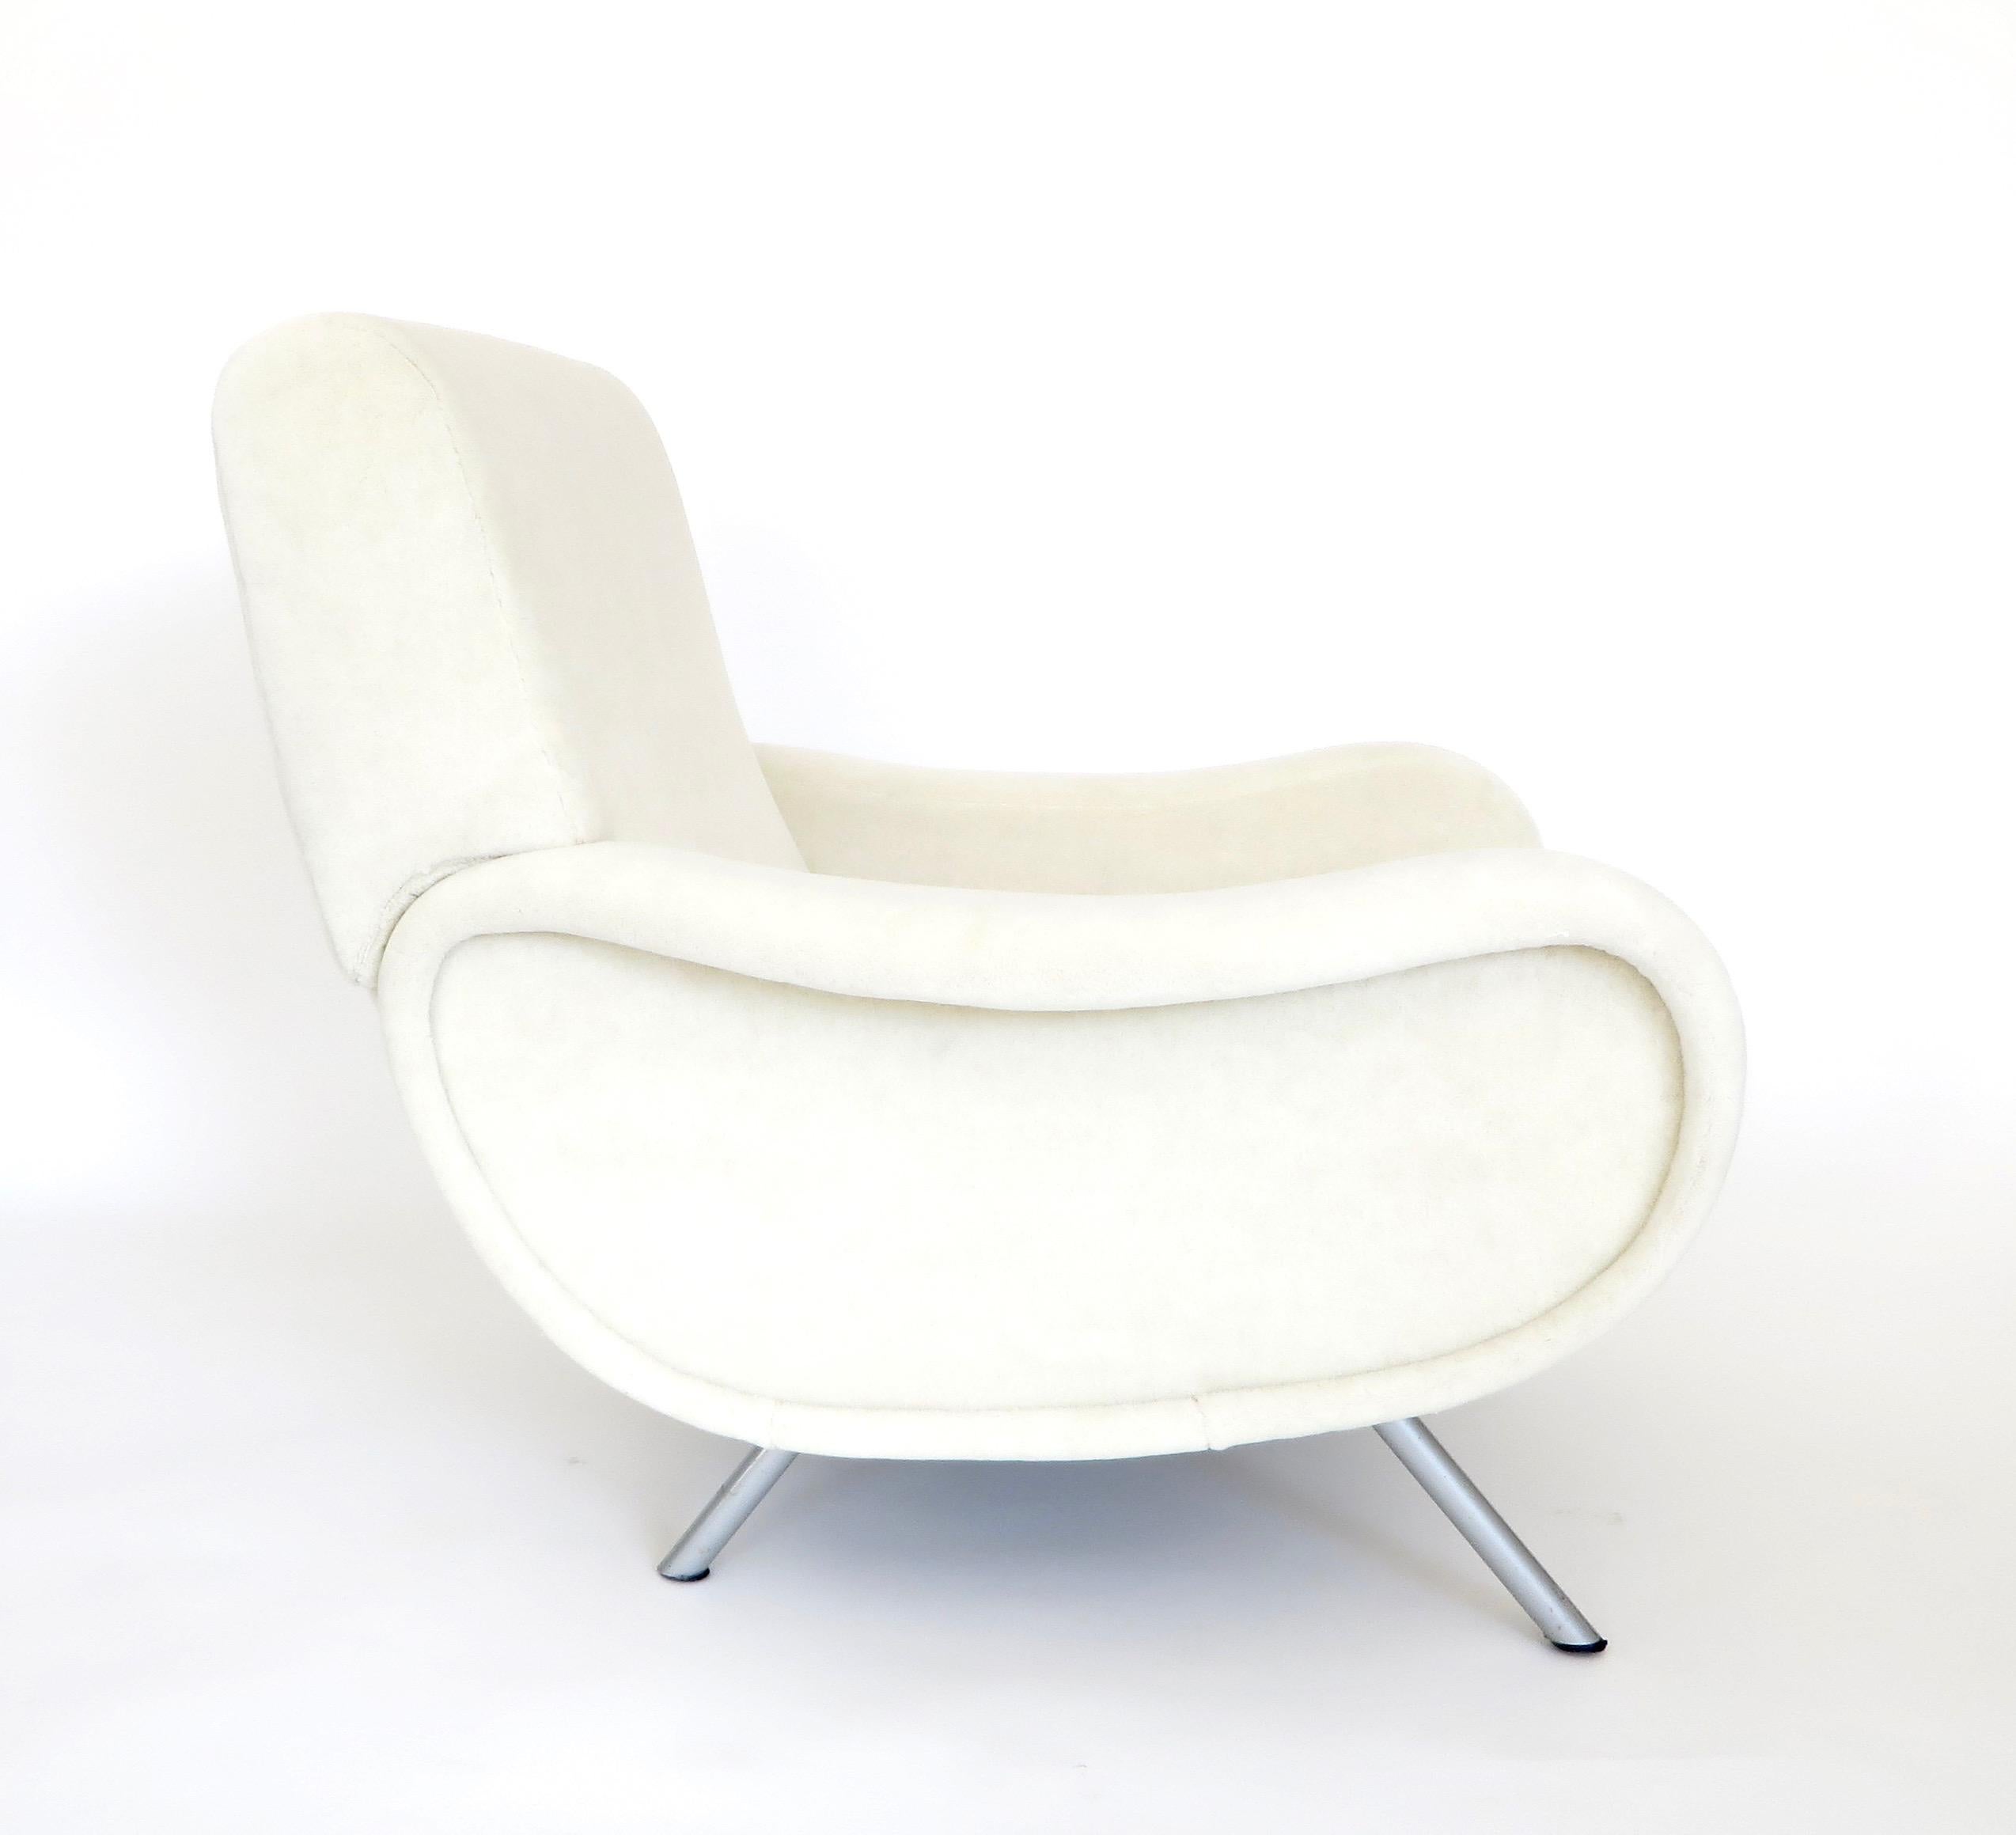 The Marco Zanuso Lady Chair was designed by Marco Zanuso for Arflex in 1951.
It won the award Medaglia d’oro or Gold Medal at the Milan IX Triennale in 1951. This lounge chair is so very comfortable and classic elegance in a modern